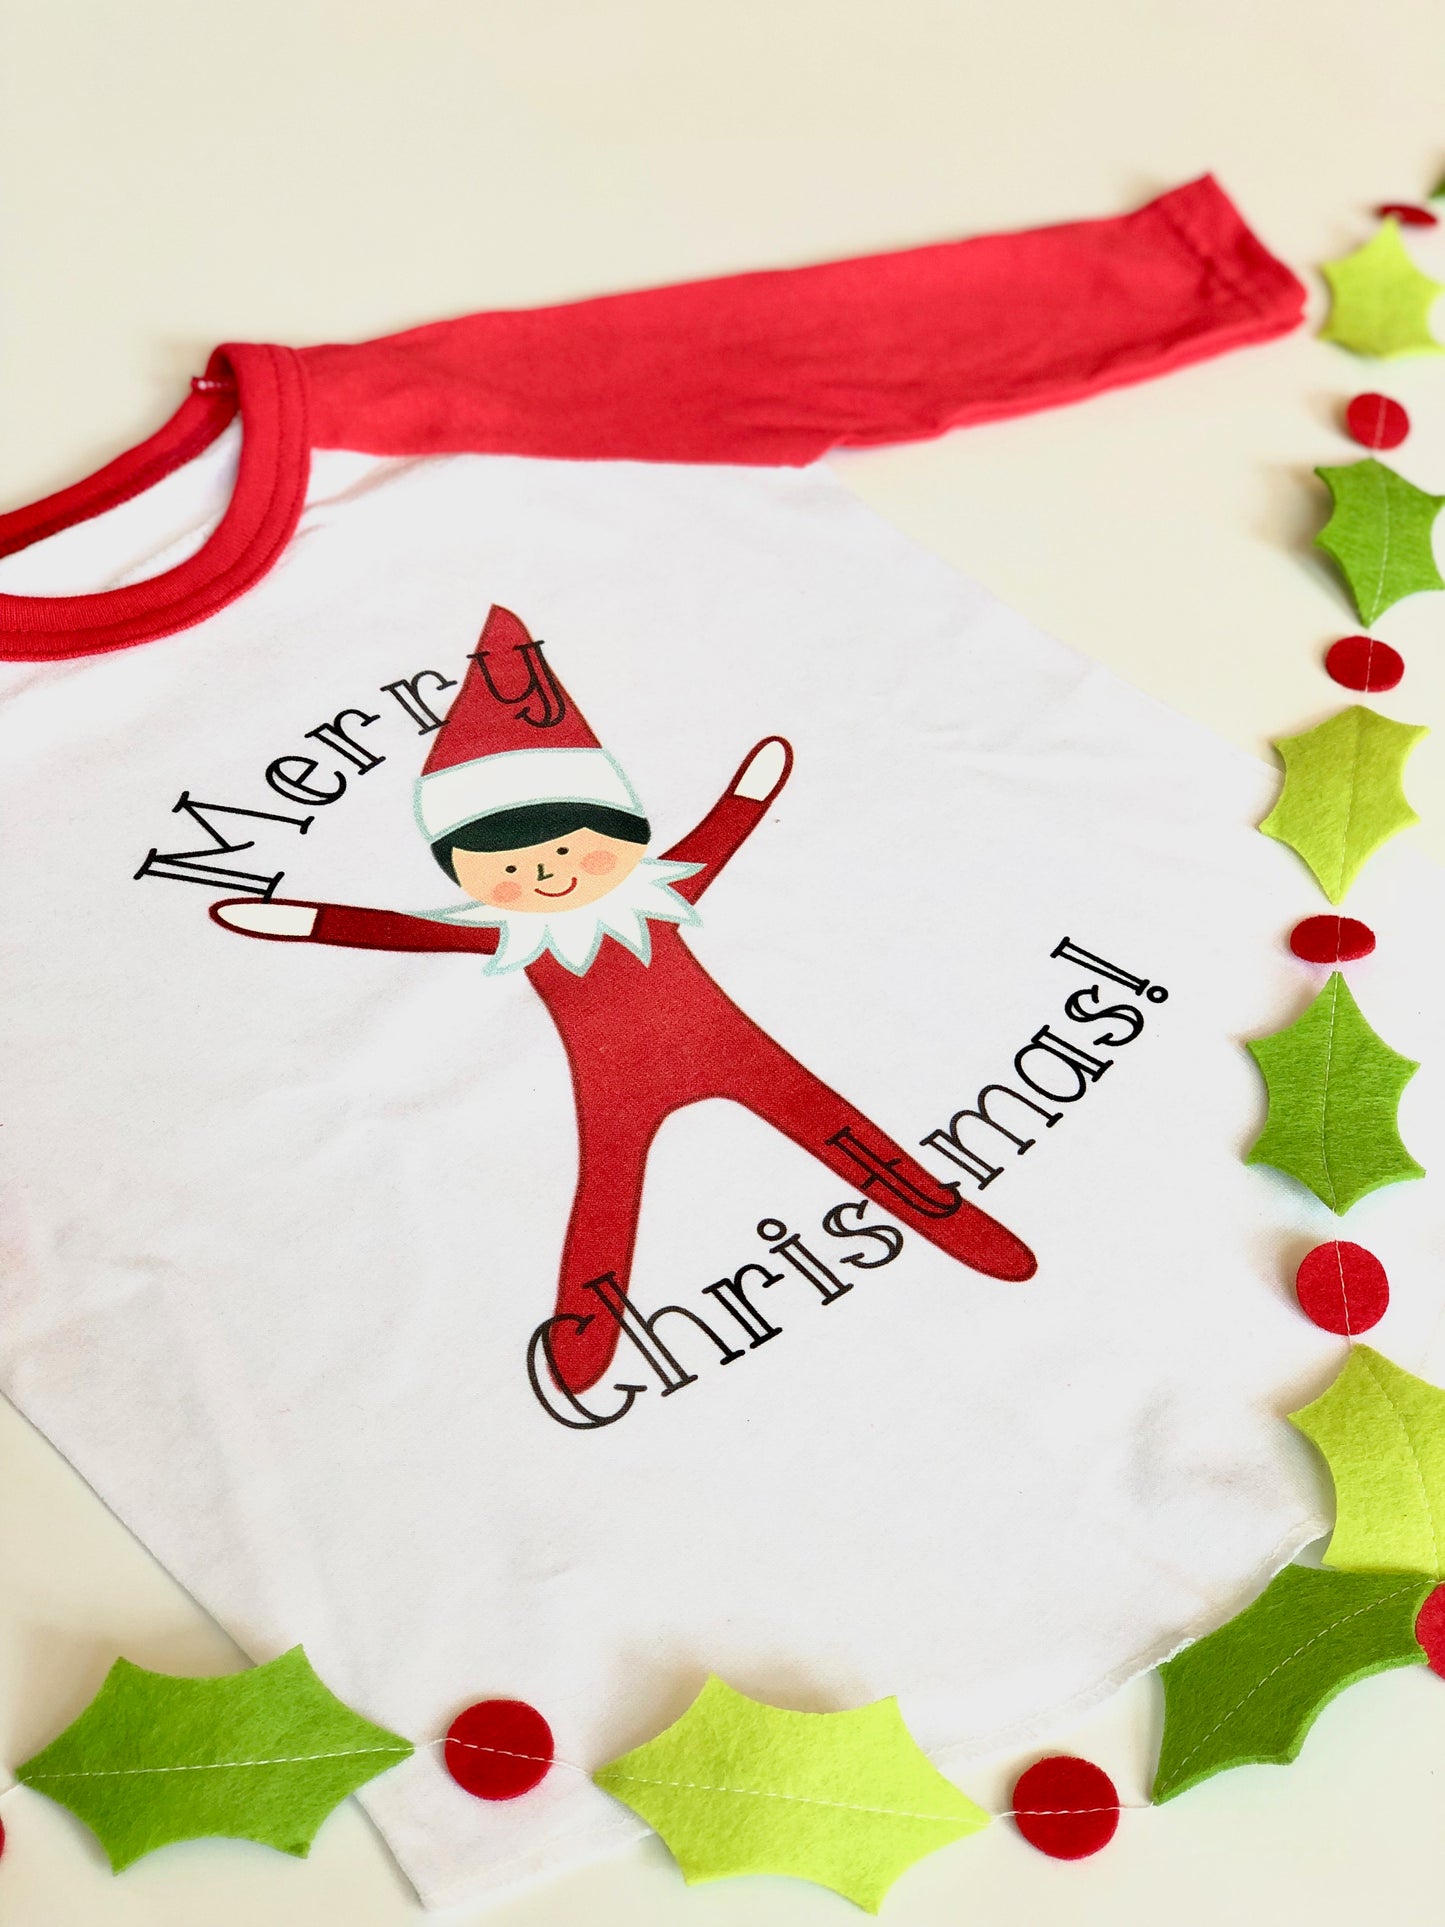 ELF ON THE T-SHIRT